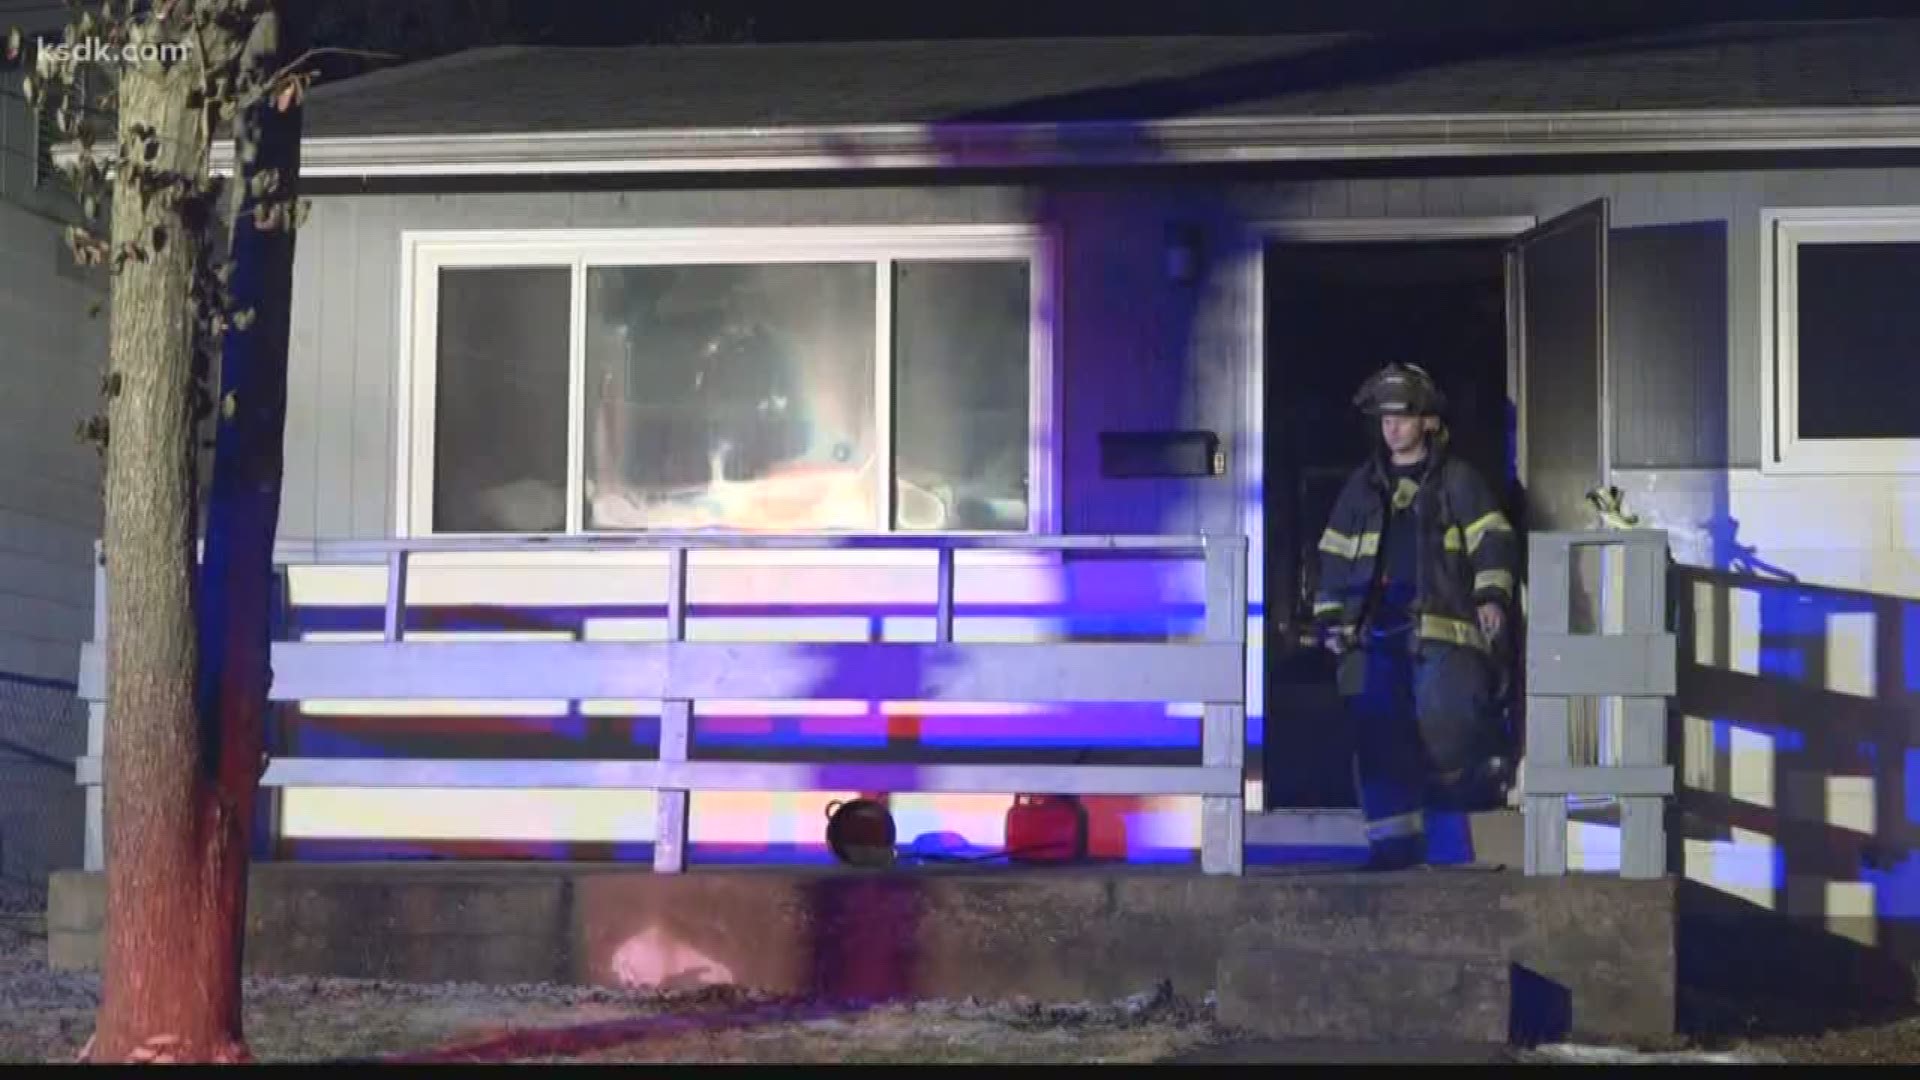 A Ferguson Fire Department captain said the woman was taken to the hospital with burns to her hands and face.